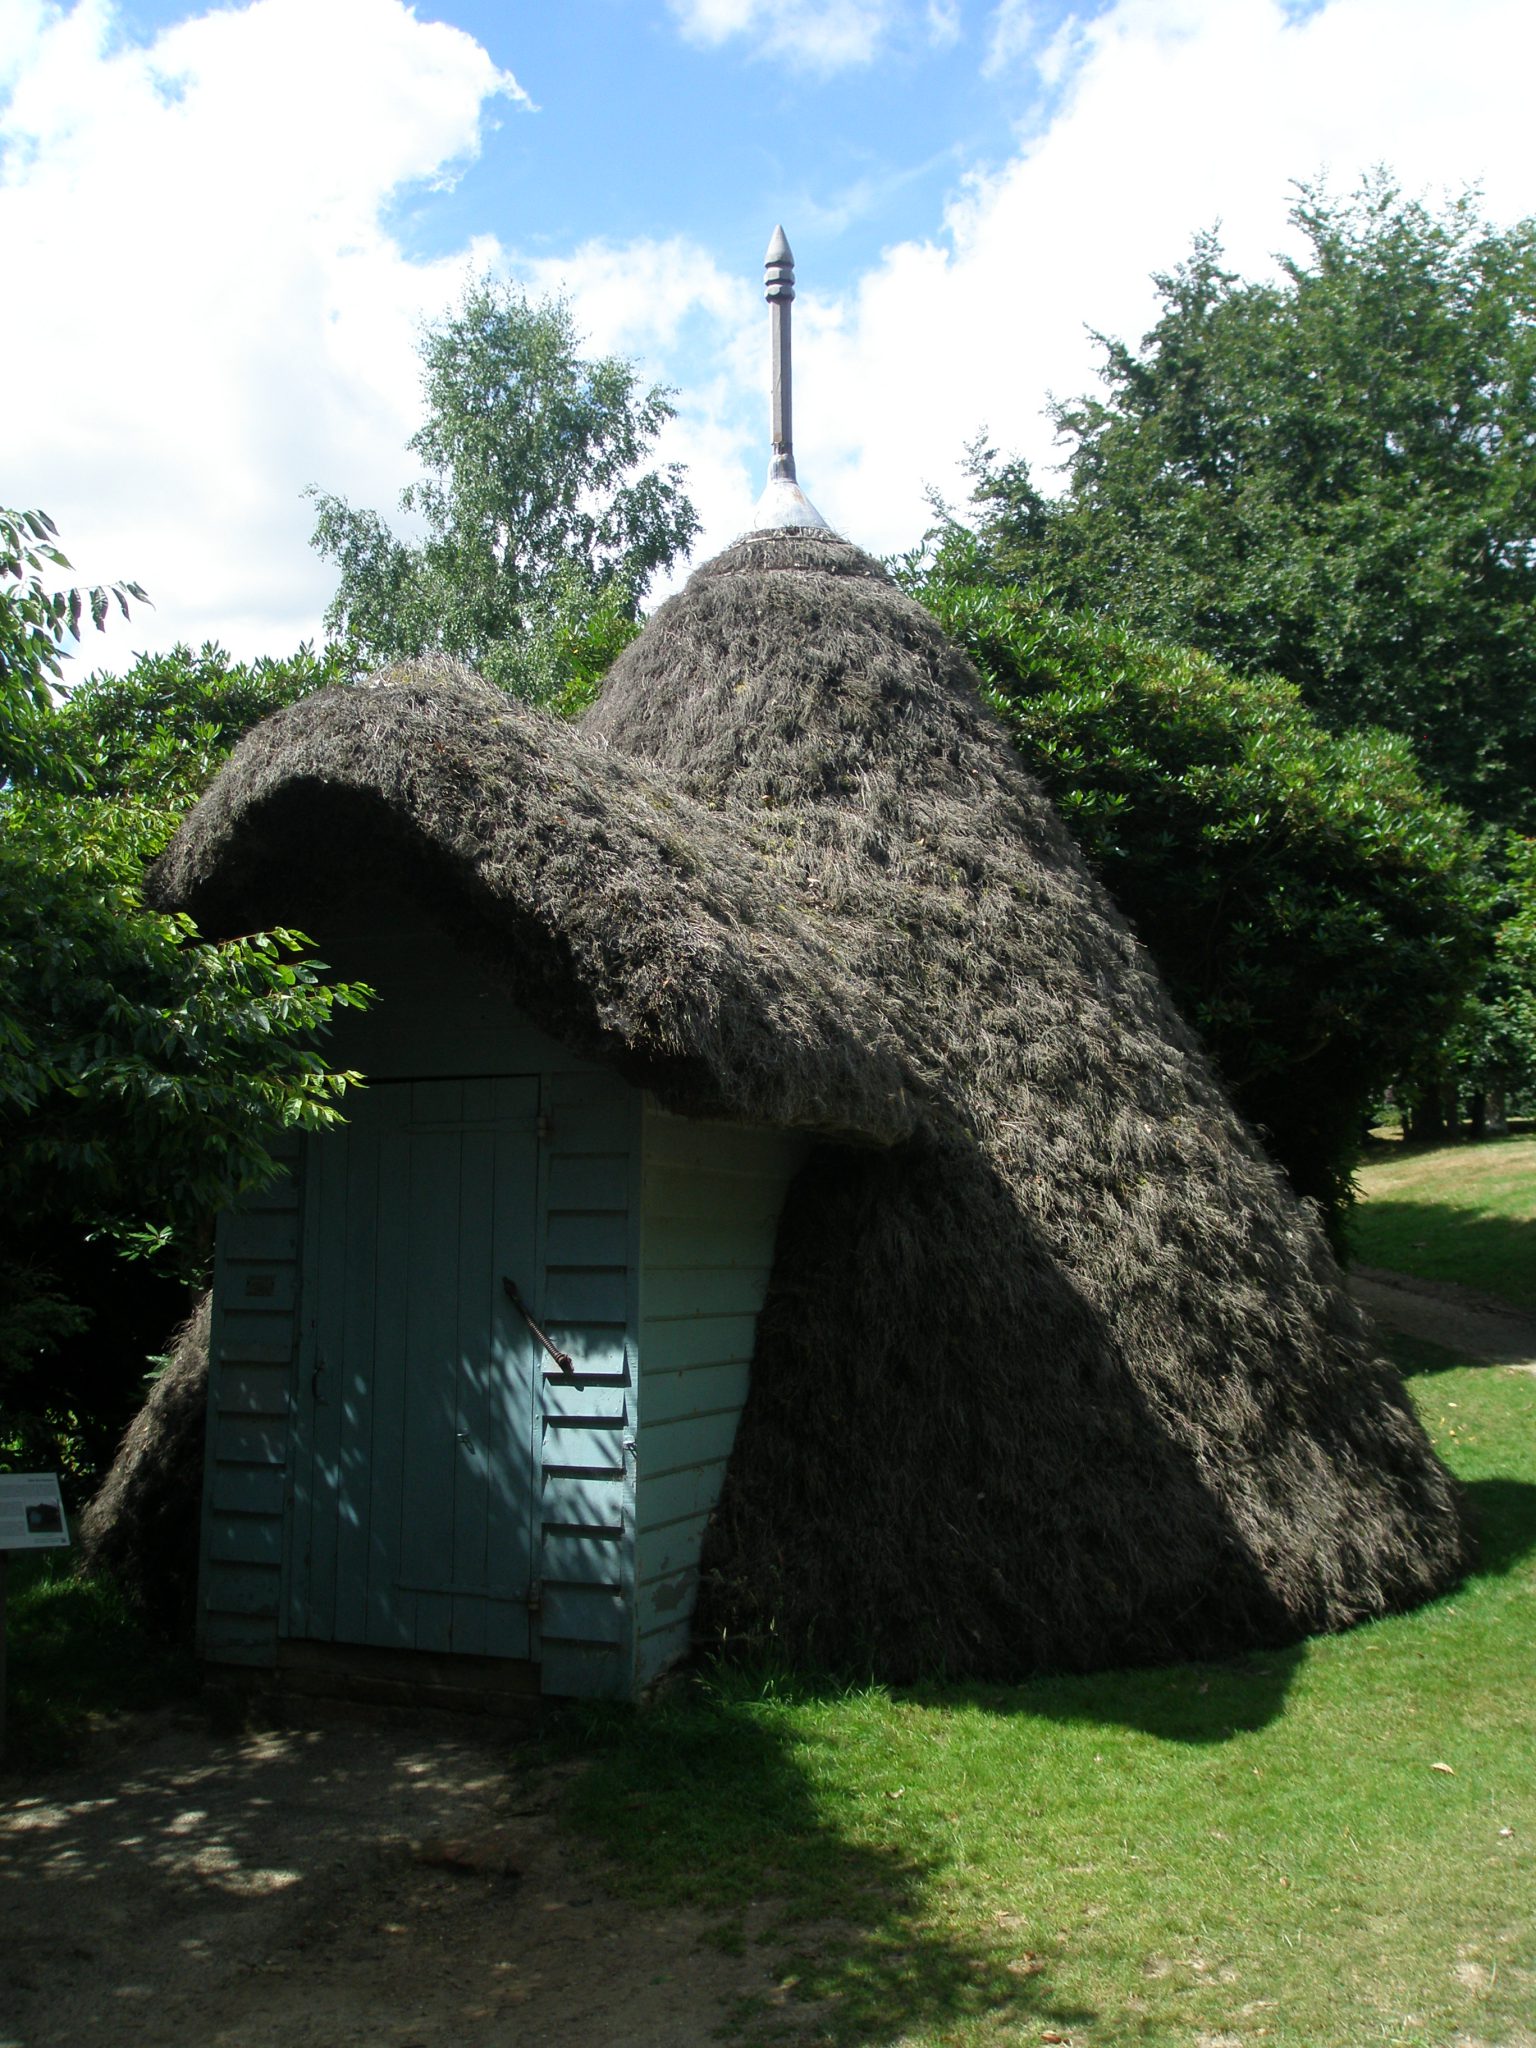 The tent-shaped Ice House is at the outer edge of the Moat, on the north-east corner.